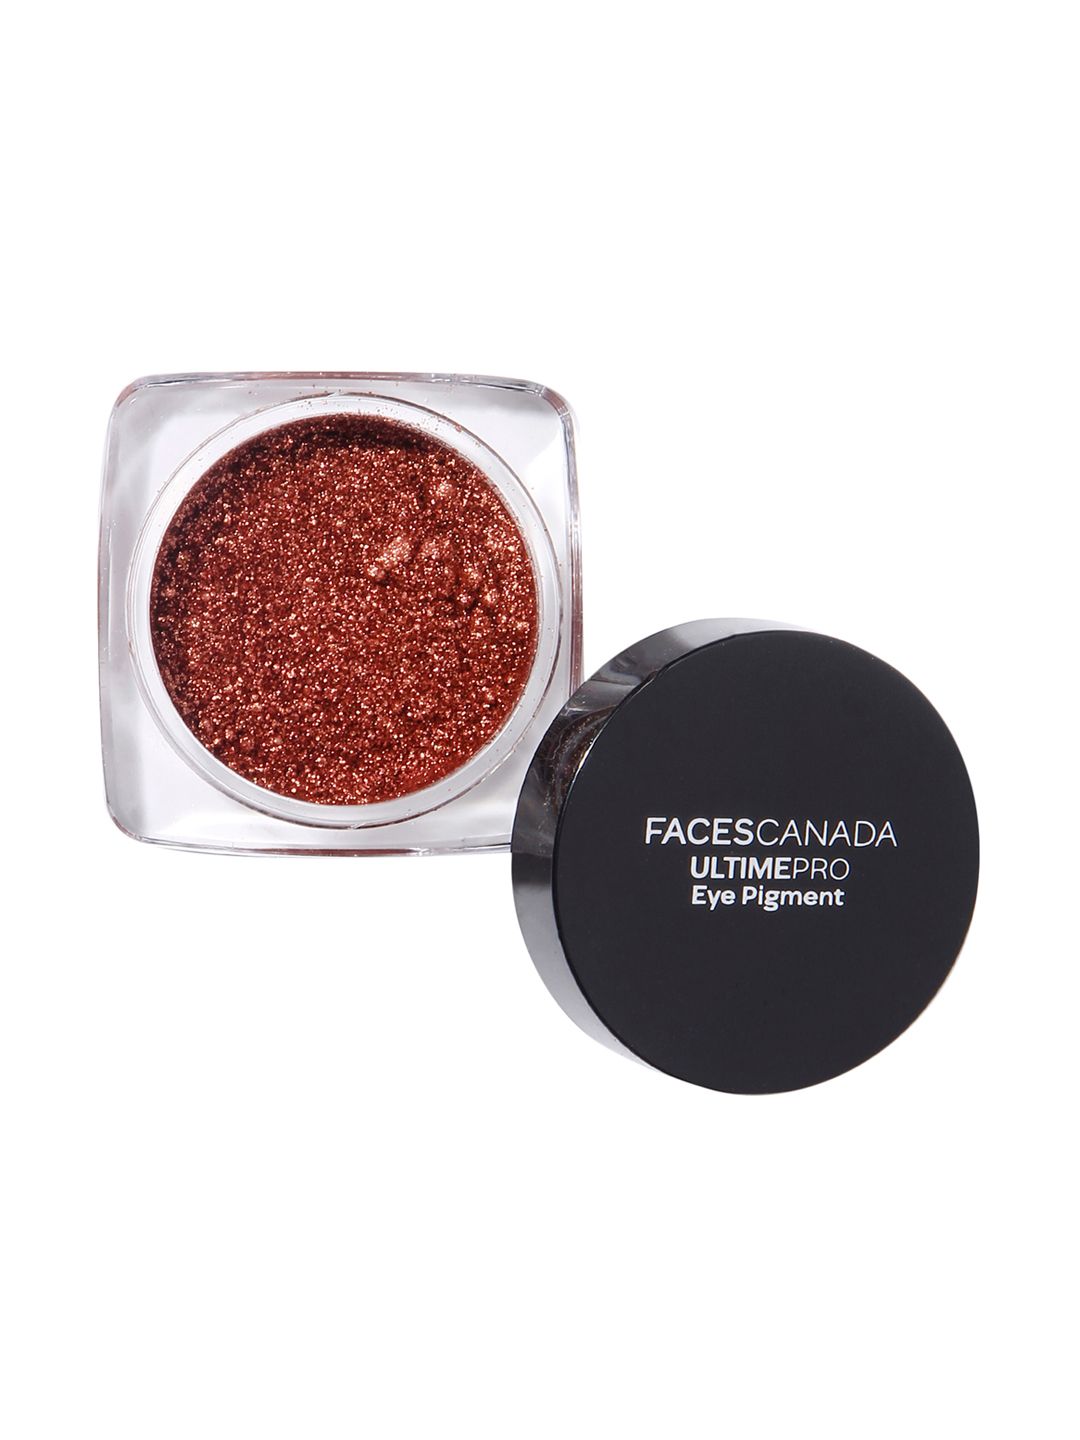 FACES CANADA Women Copper-Coloured Eye Pigment Eyeshadow 03 Price in India